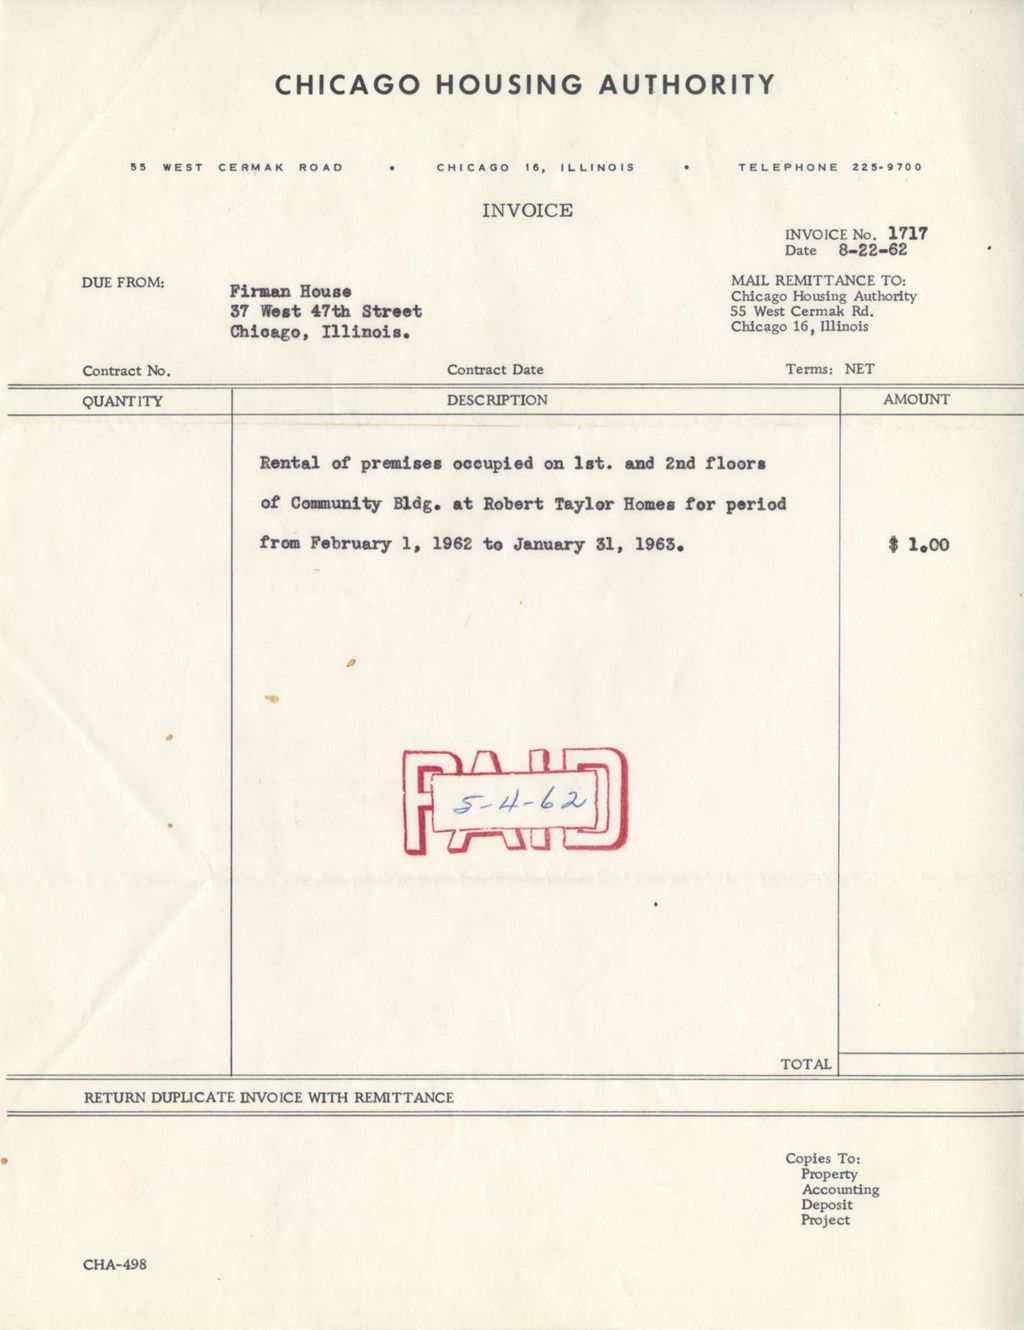 Invoice from the Chicago Housing Authority